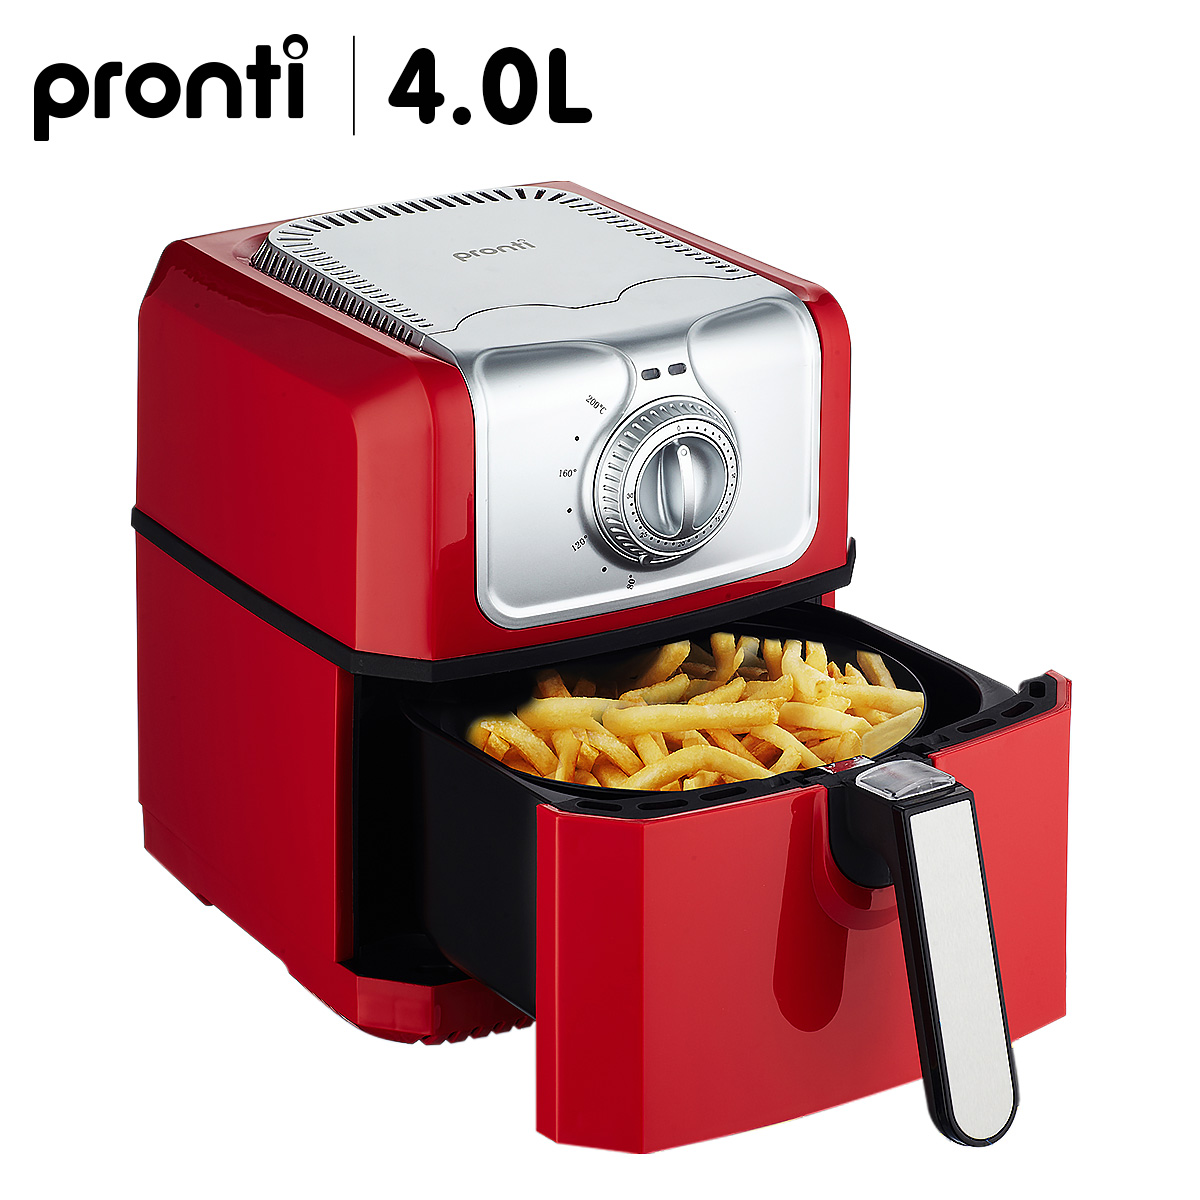 Pronti Air Fryer Cooker 4.0L HF-888 - Red